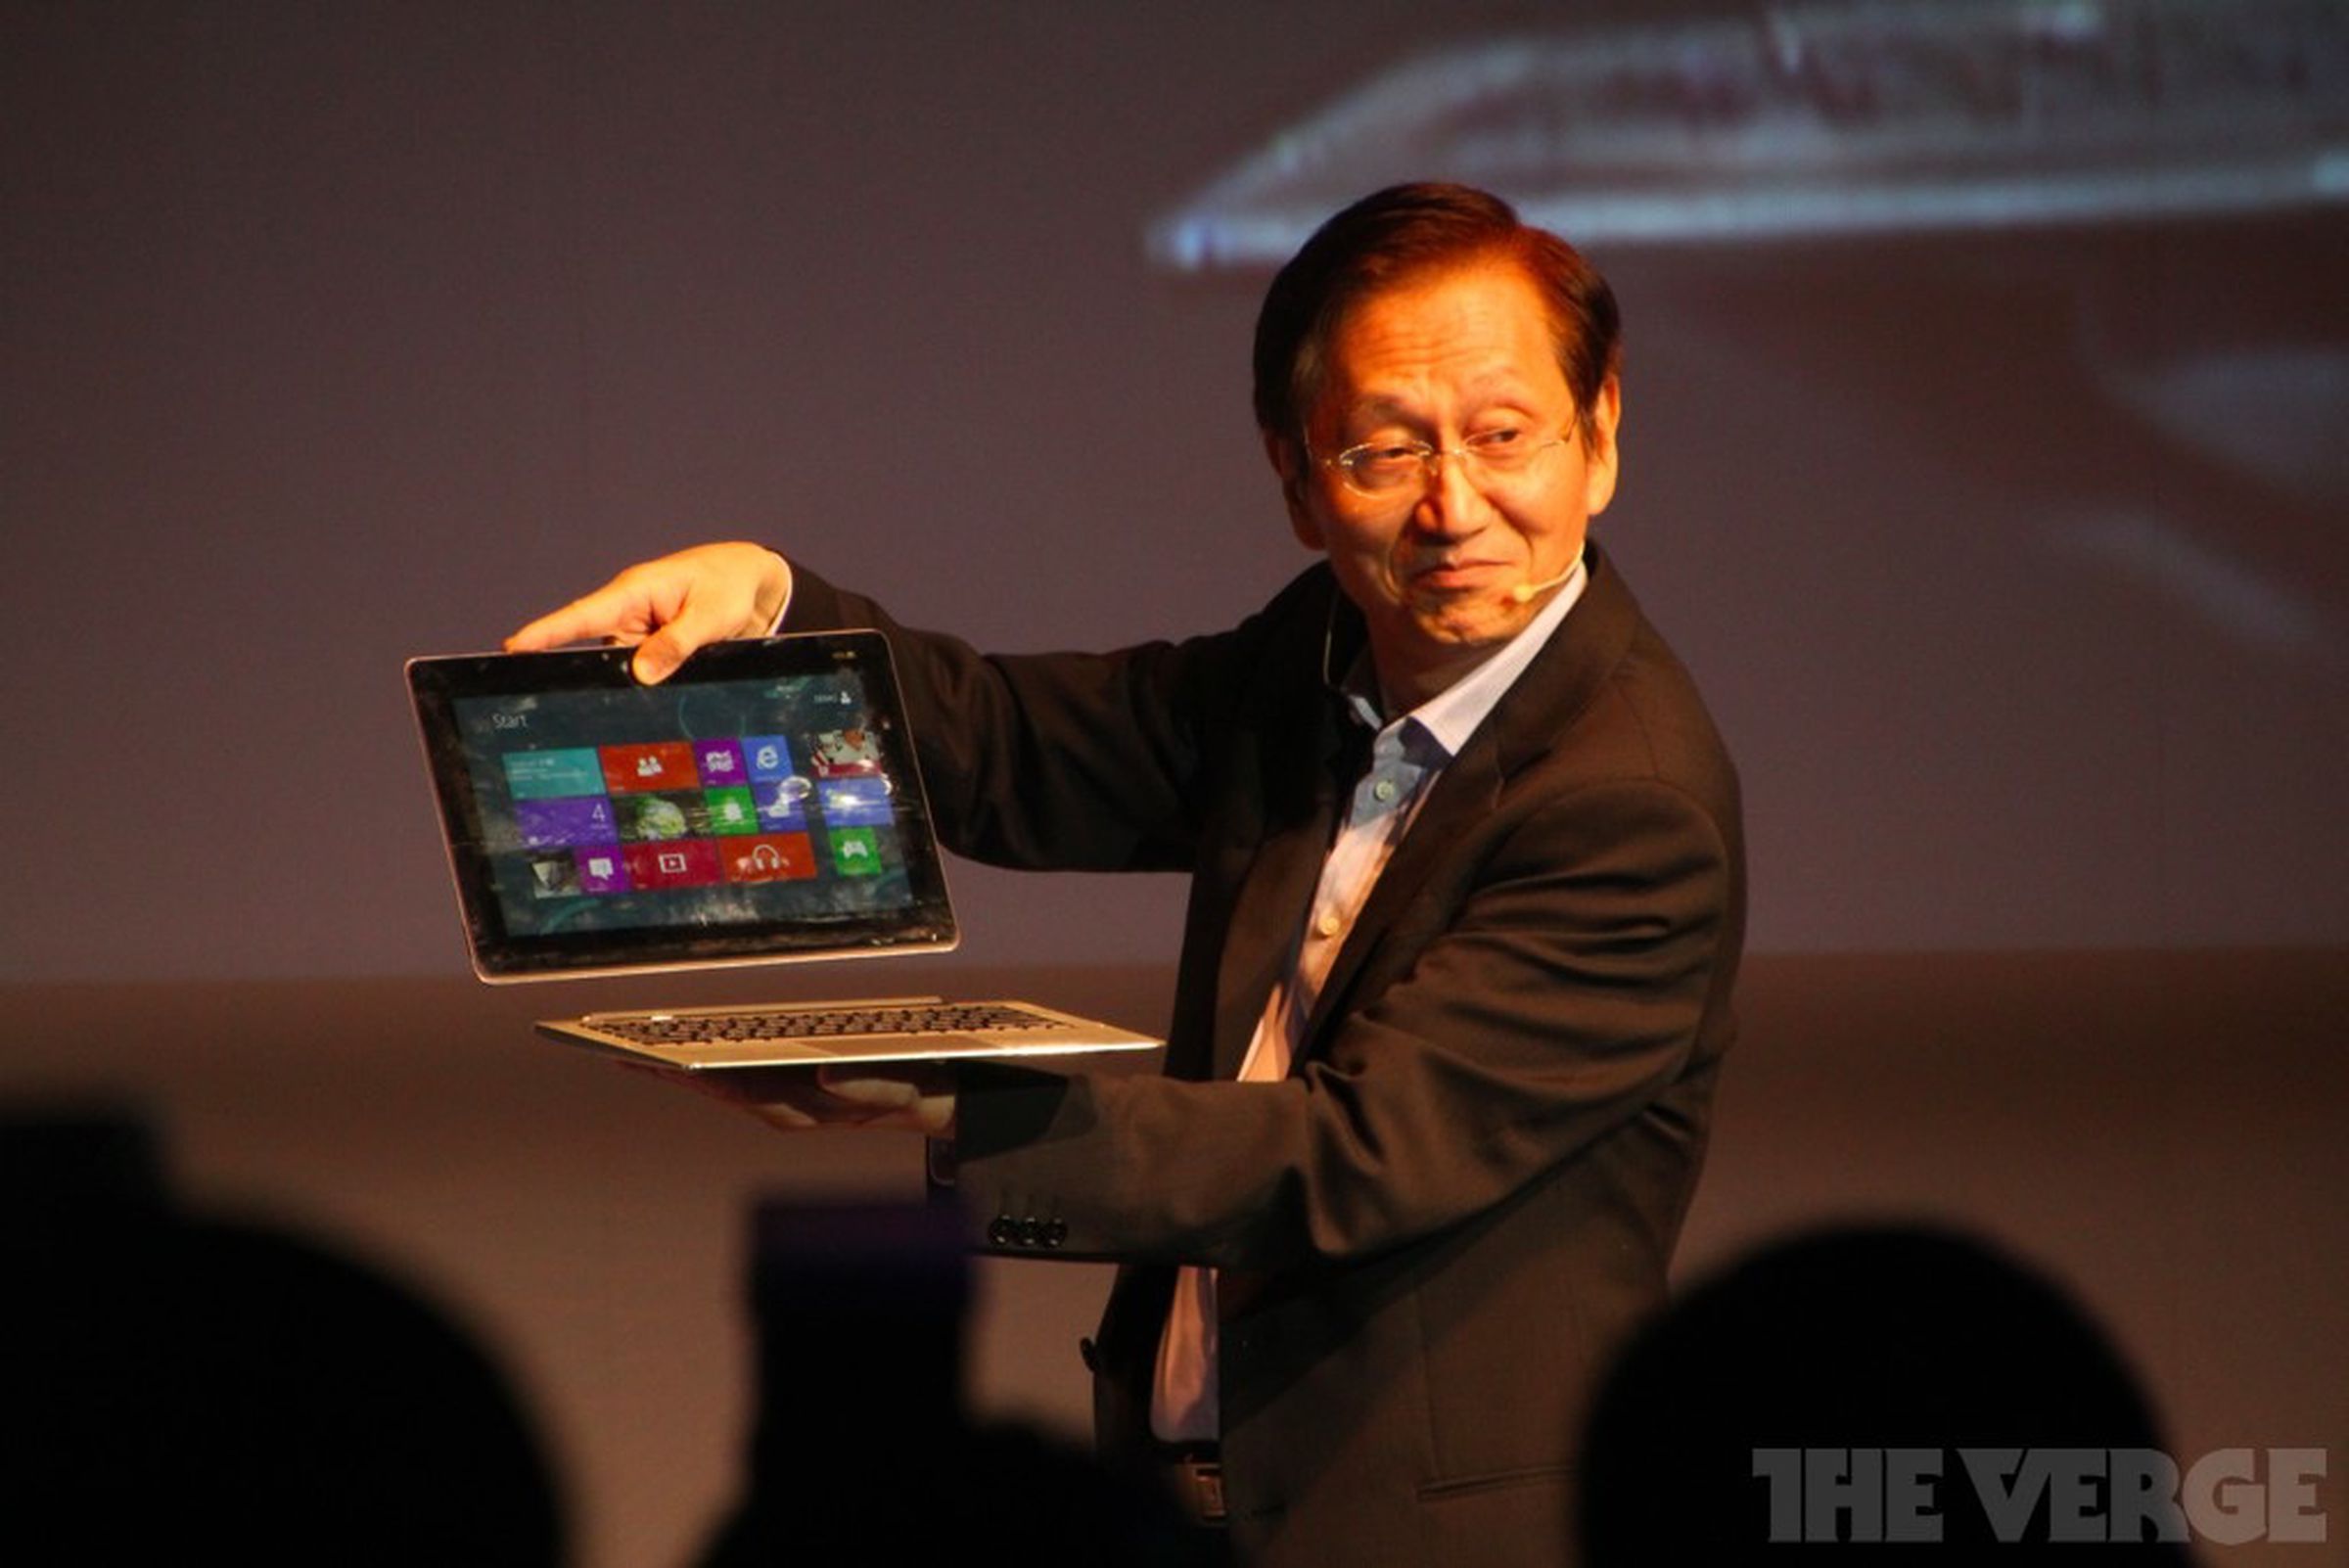 Asus Transformer Book pictures